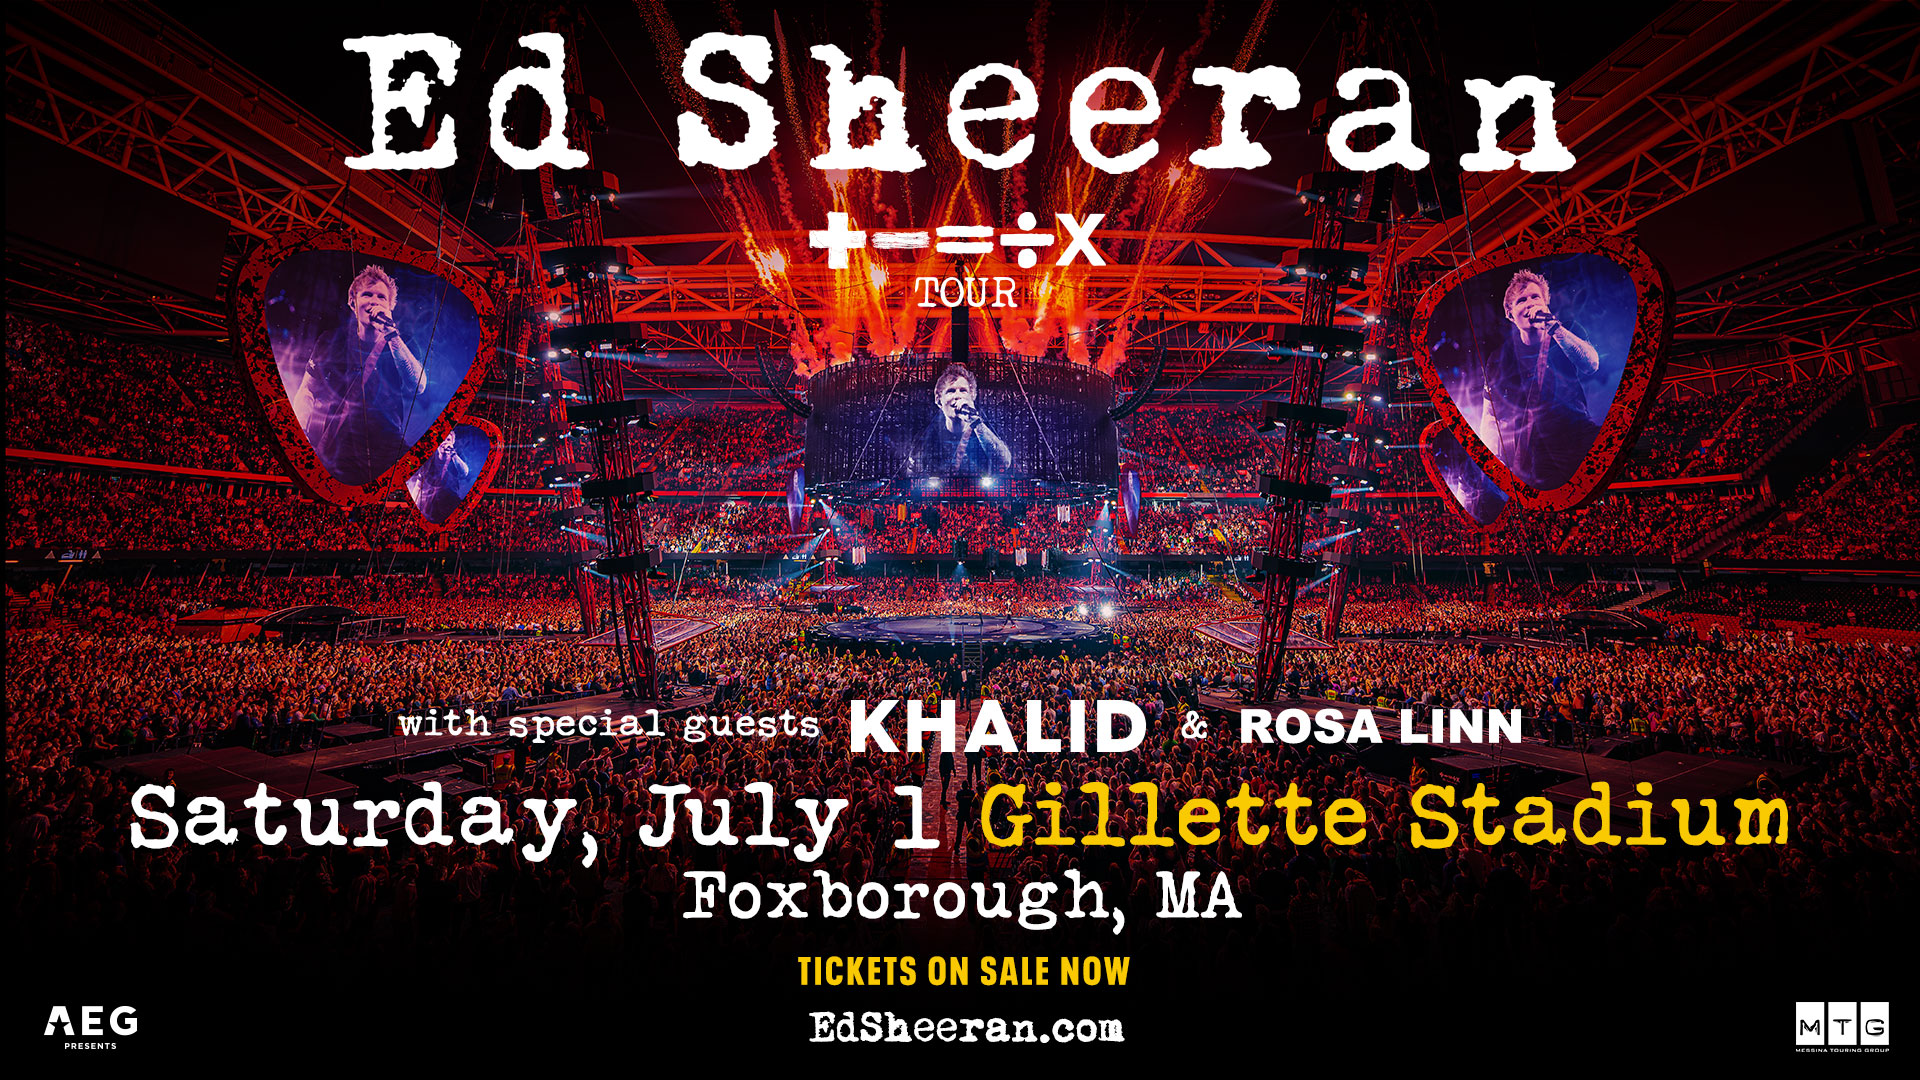 Win Tickets to See Ed Sheeran, Khalid on ‘The Mathematics Tour’ at Gillette